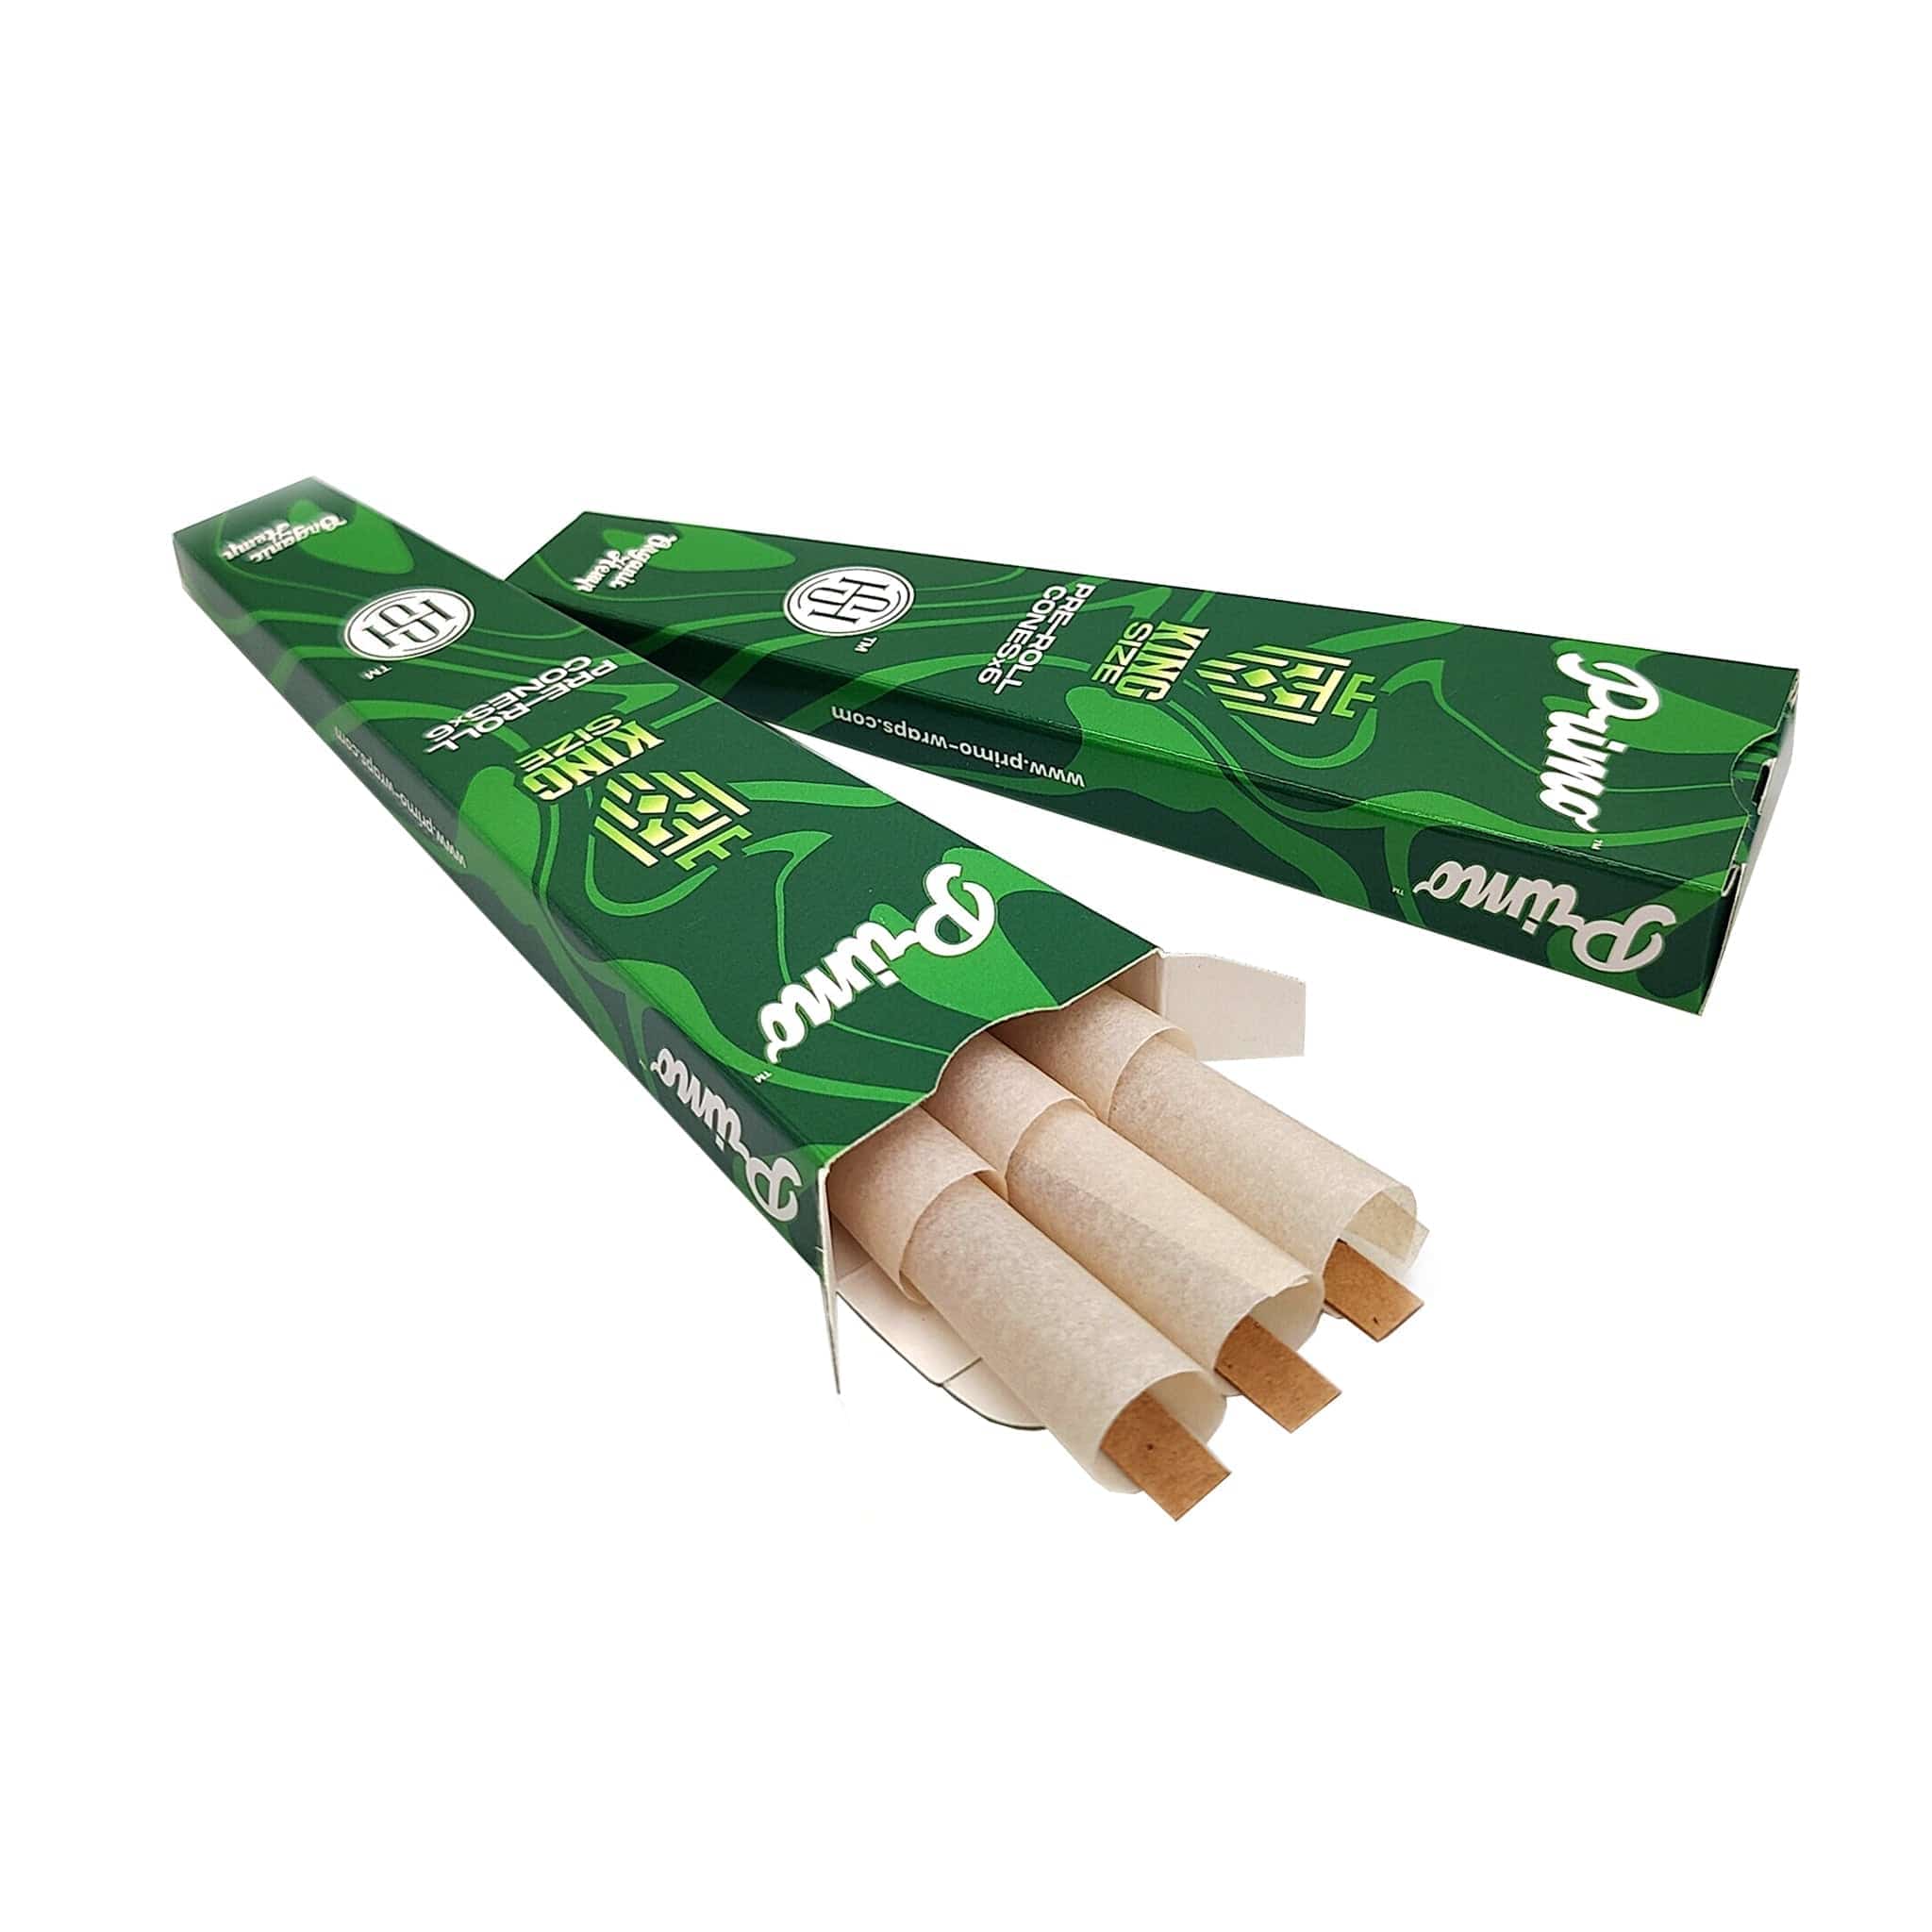 The Puff Brands High Society - Primo Organic Hemp Pre-Roll Cones with Filter - King Size - (1) Pack